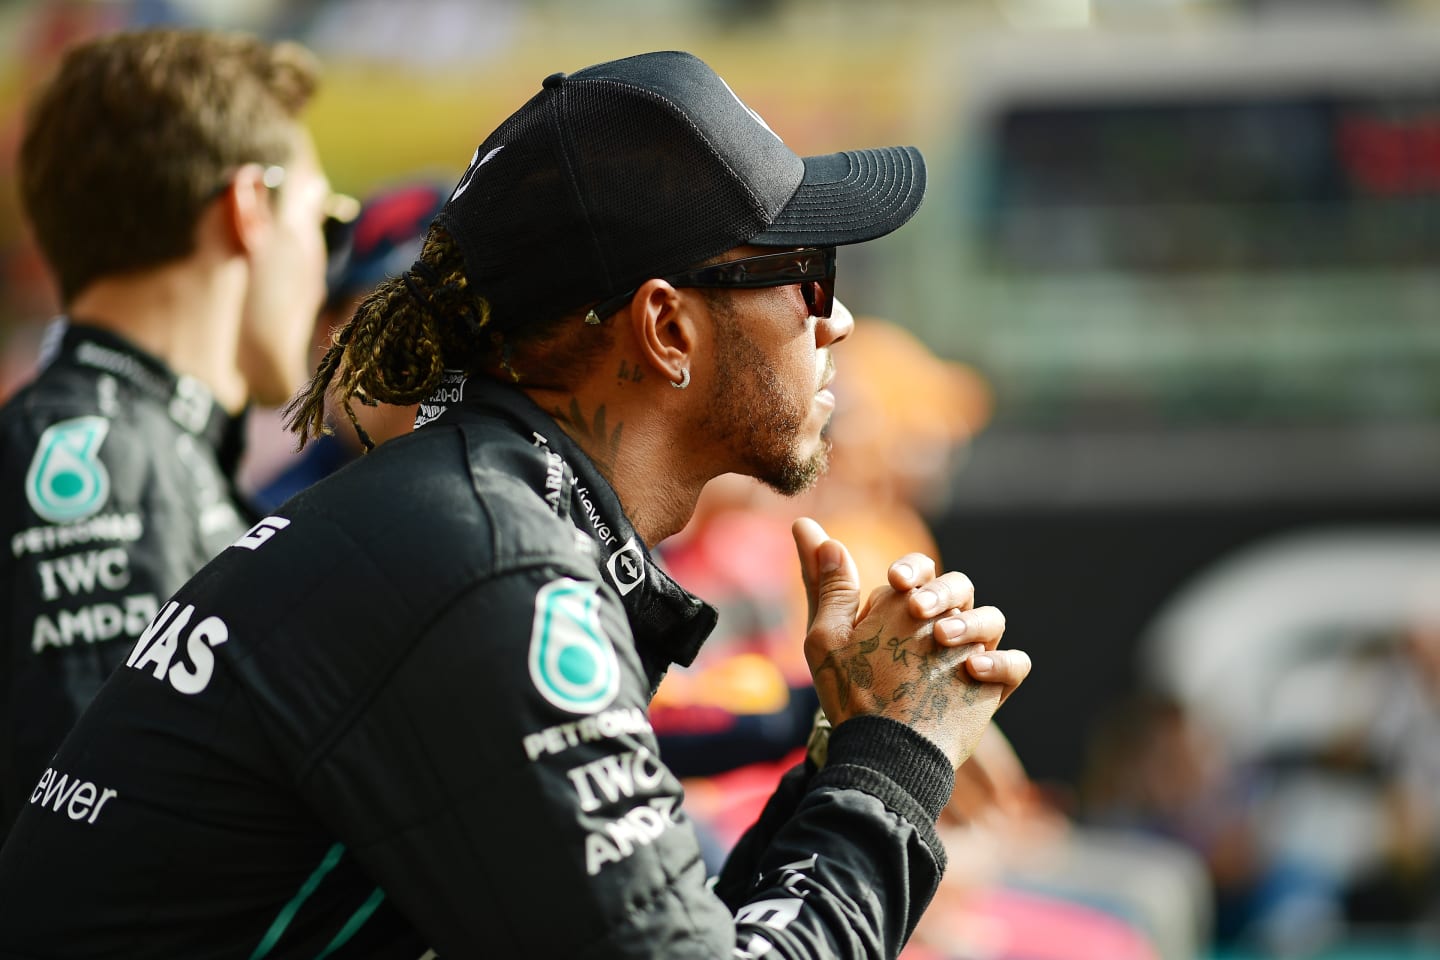 ABU DHABI, UNITED ARAB EMIRATES - NOVEMBER 20: Lewis Hamilton of Great Britain and Mercedes looks on ahead of the F1 2022 End of Year photo prior to the F1 Grand Prix of Abu Dhabi at Yas Marina Circuit on November 20, 2022 in Abu Dhabi, United Arab Emirates. (Photo by Mario Renzi - Formula 1/Formula 1 via Getty Images)